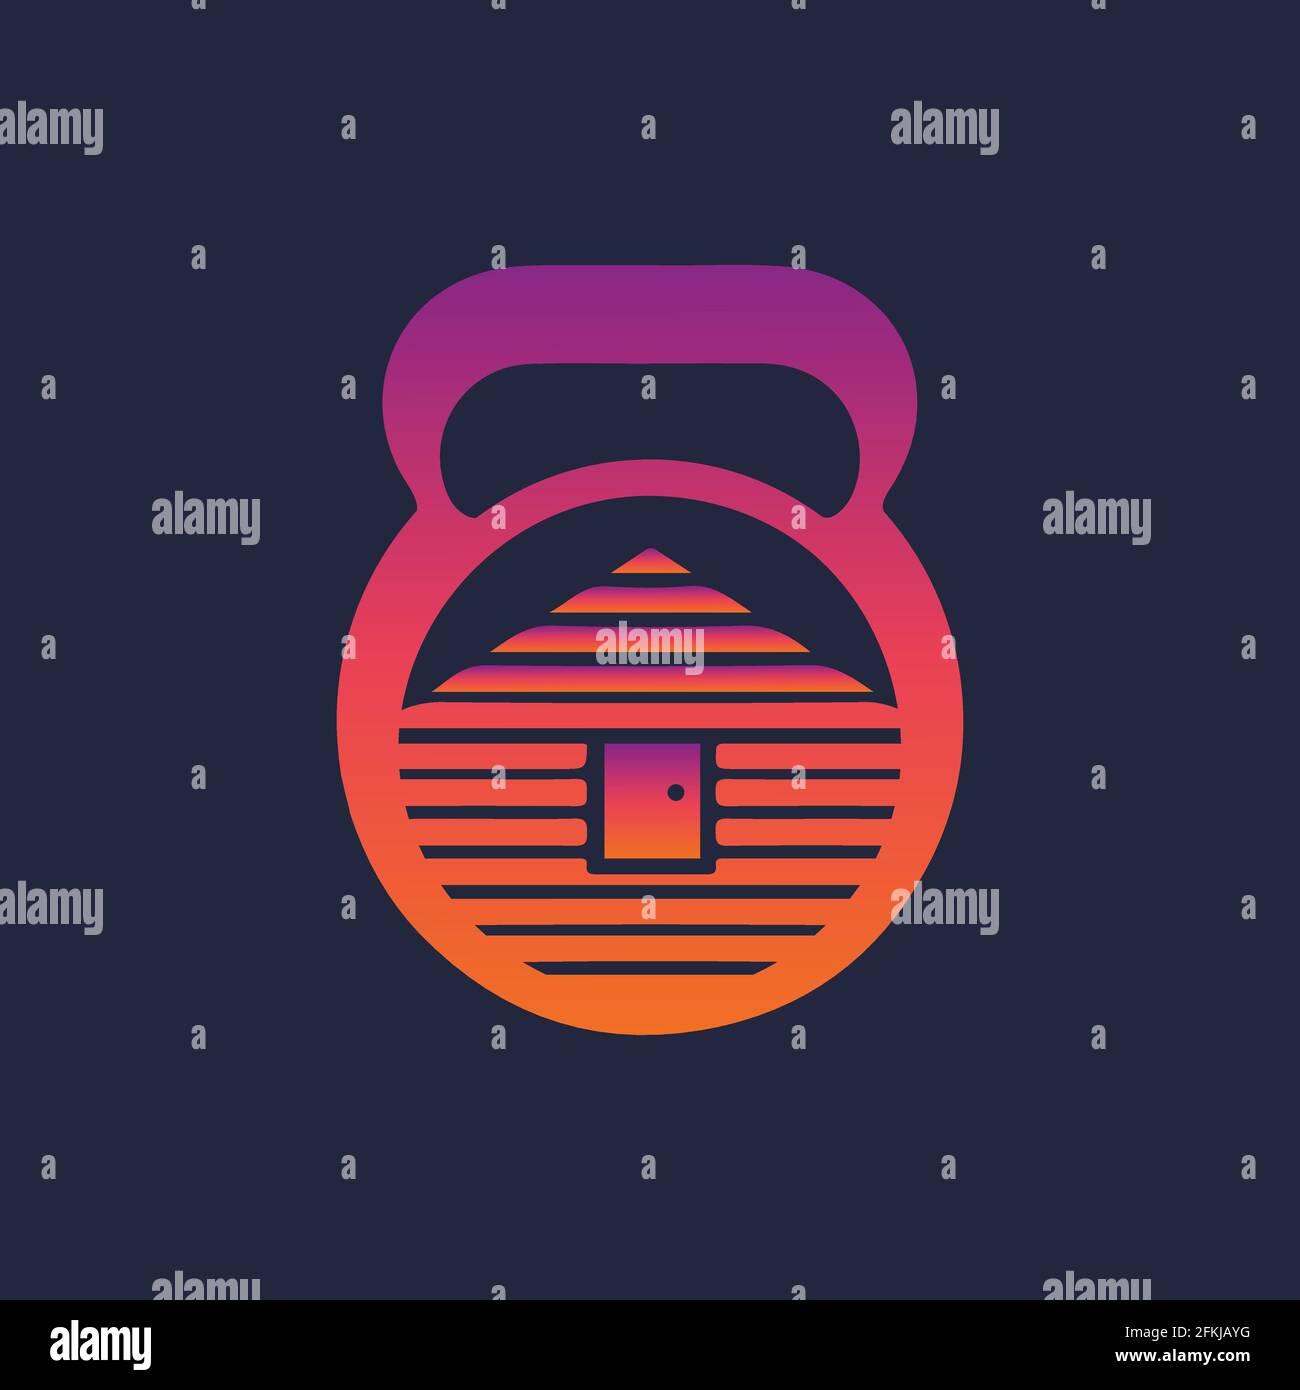 wood buildings with fitness dumbbell icon logo design Stock Vector